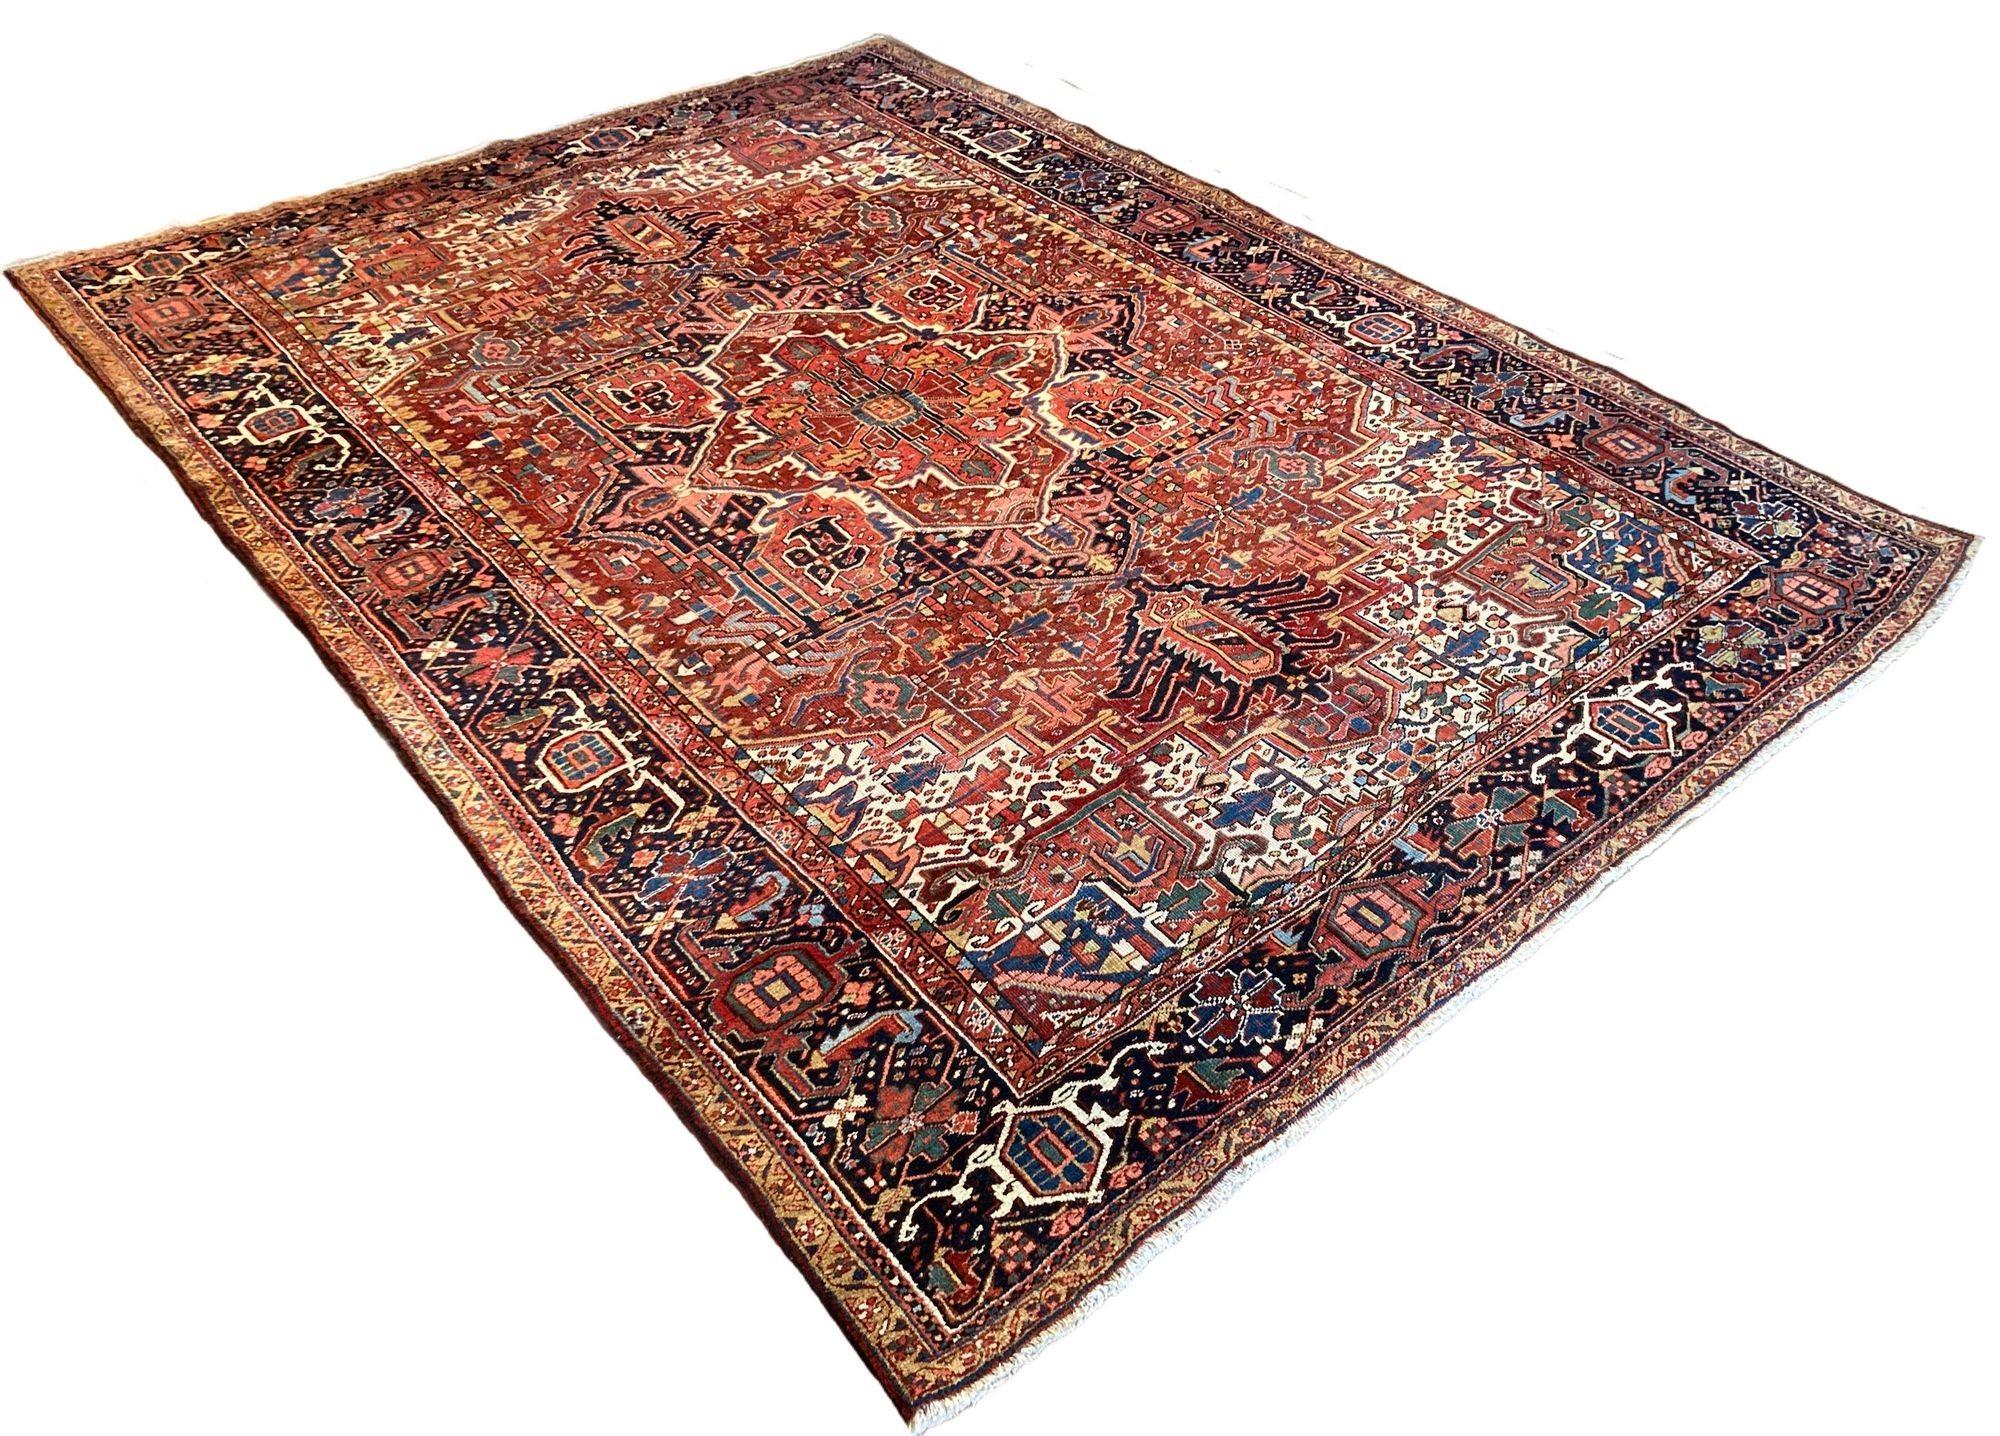 Antique Heriz Carpet 3.78m x 2.81m In Good Condition For Sale In St. Albans, GB